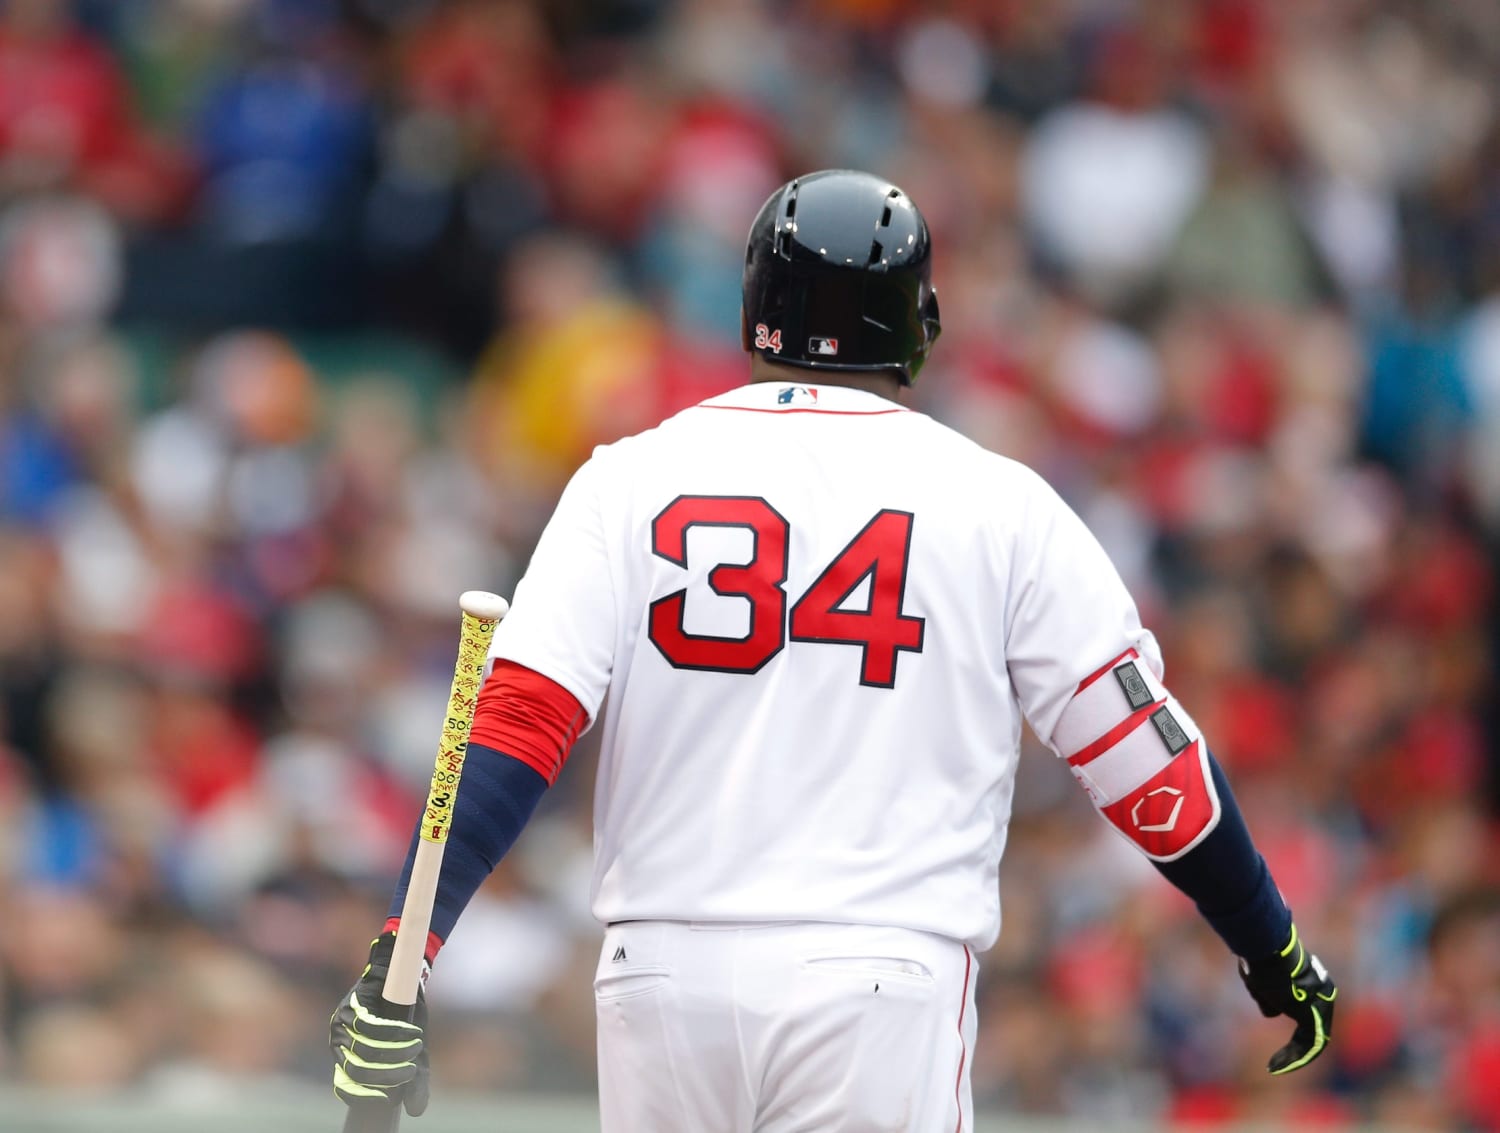 Big Papi Will Become 10th Red Sox Legend To Retire A Number